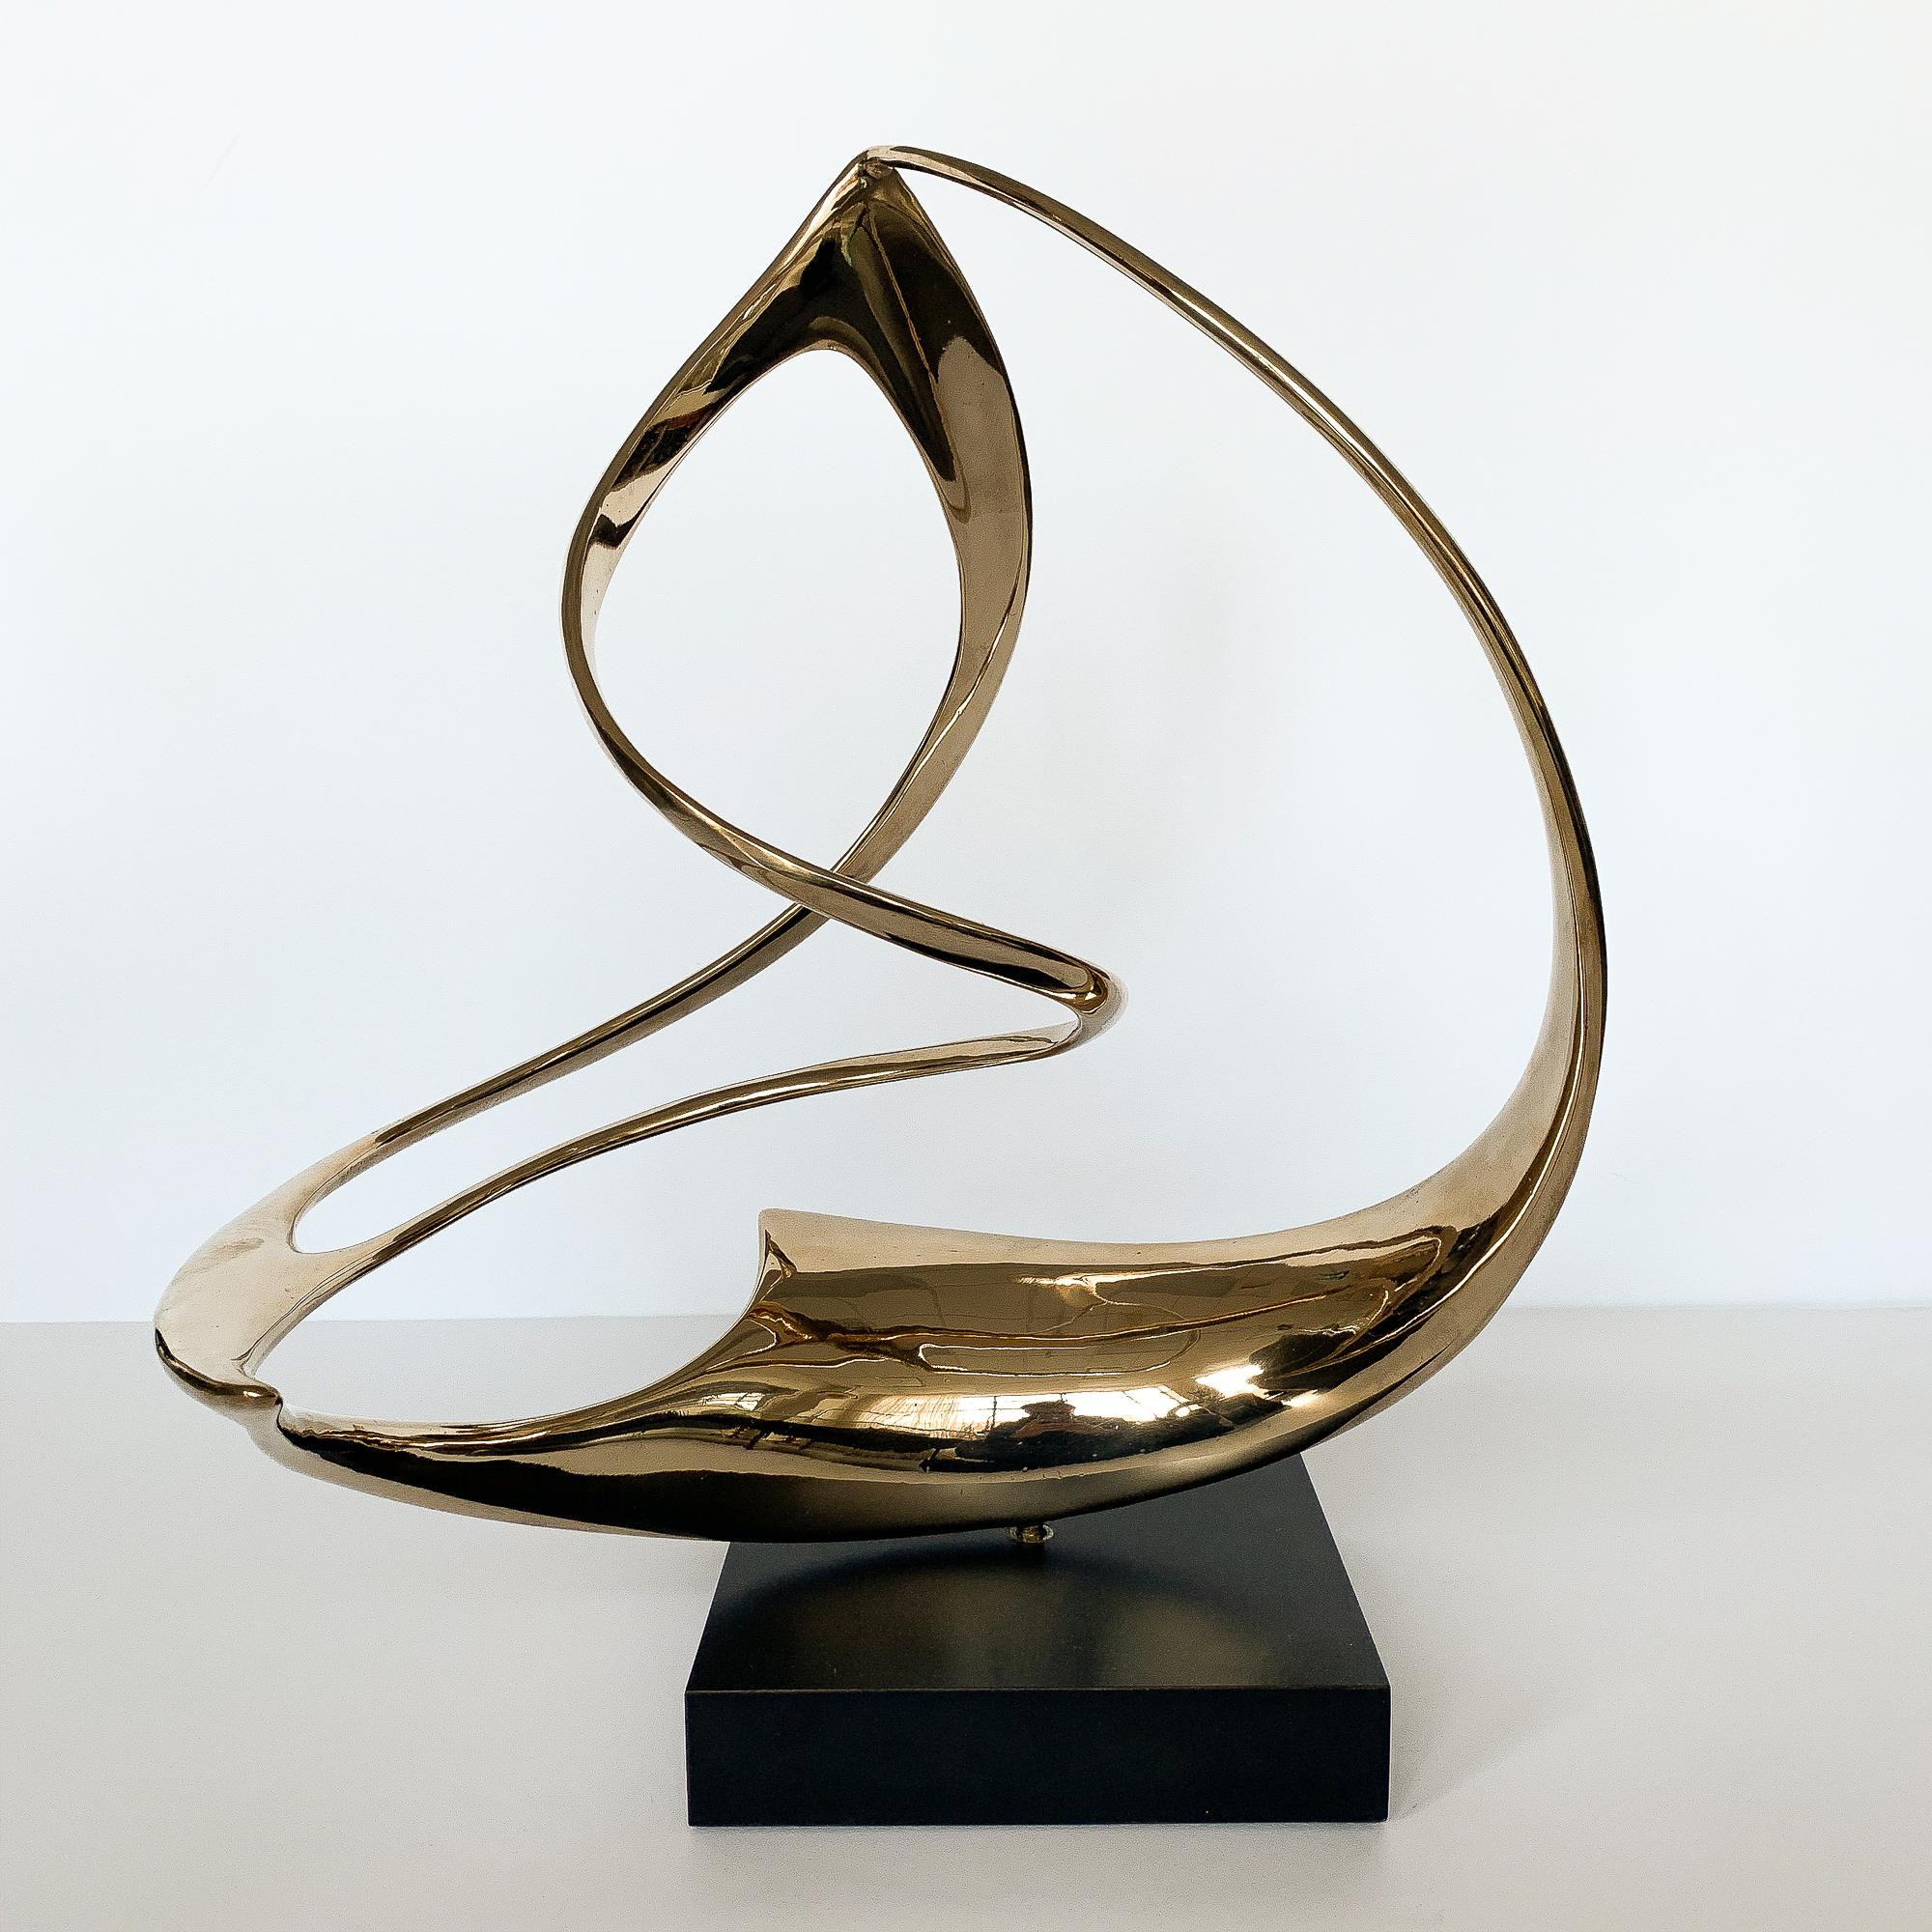 Large solid bronze abstract ribbon sculpture by Louis Pearson and Robbie Robbins. Titled 